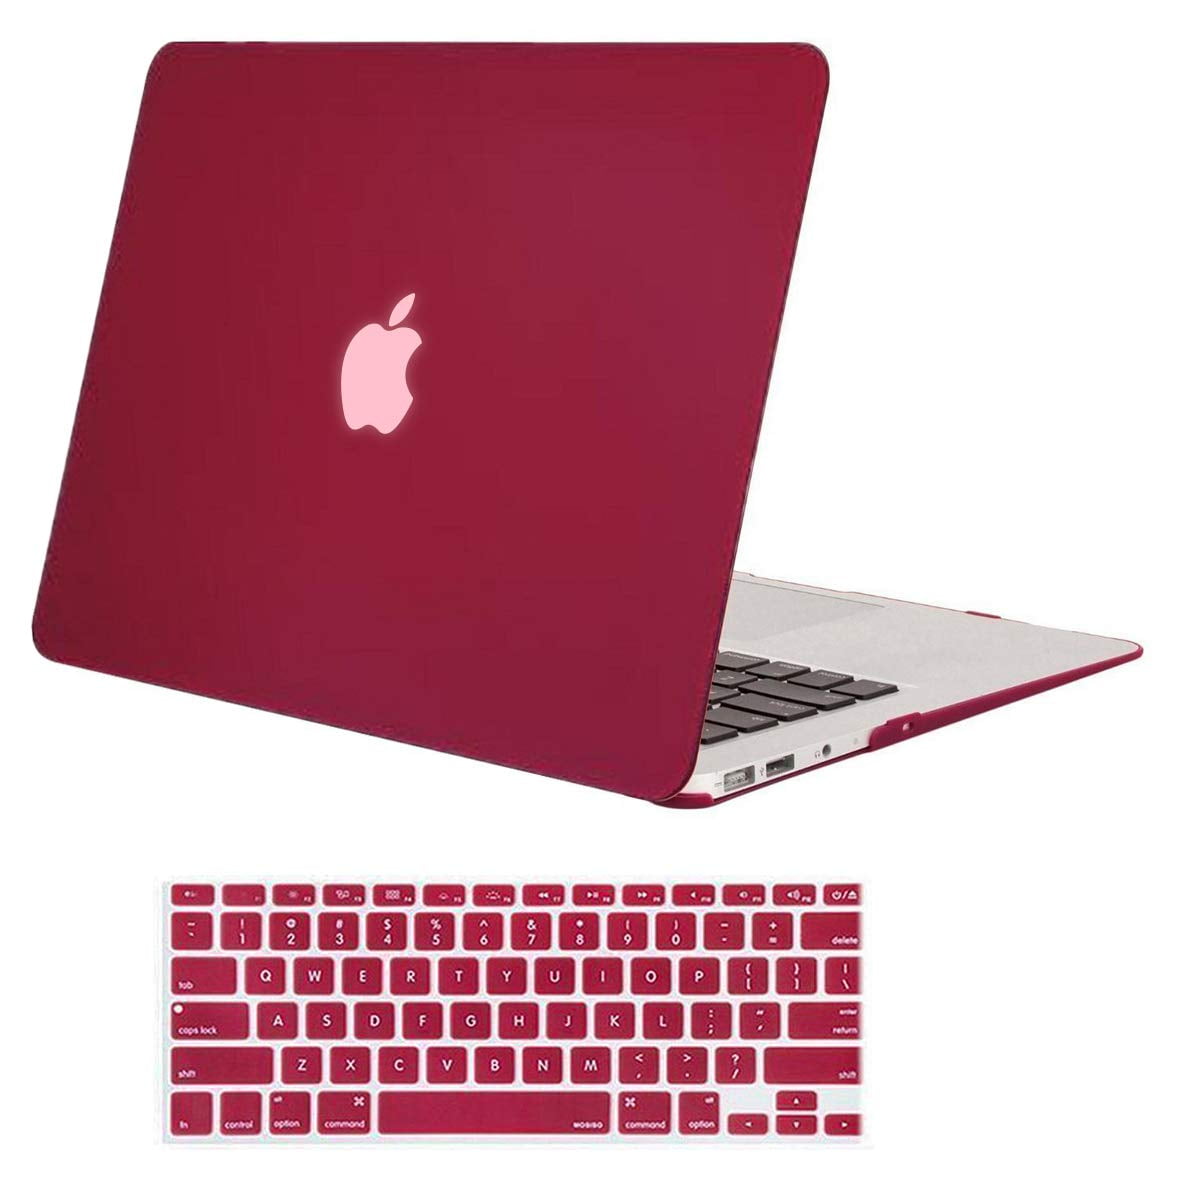 Mosiso Plastic Hard Cover Case for MacBook Air 13 inch No Touch ID (Models:  A1369 &A1466,2010-2017)With Keyboard Cover,Wine-Red